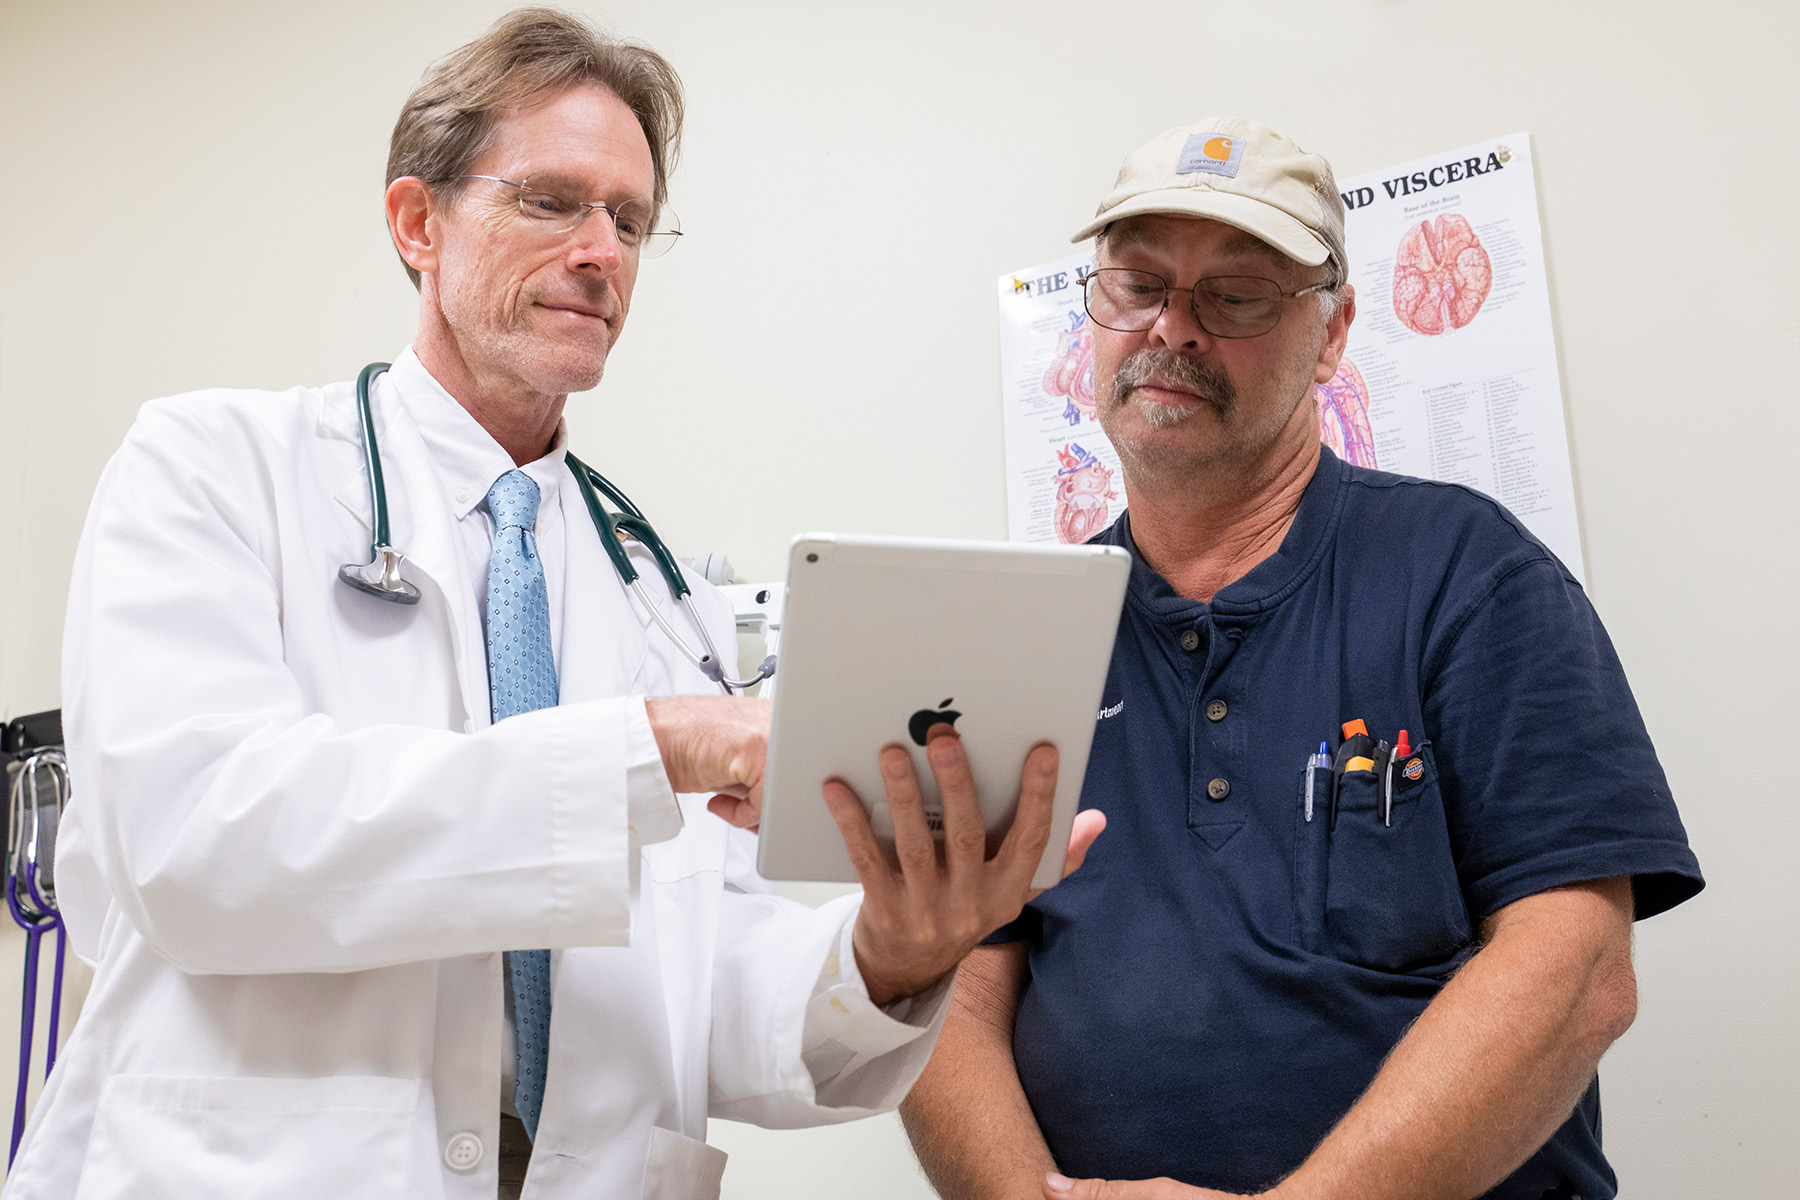 A male physician and a male patient look at health information on a tablet